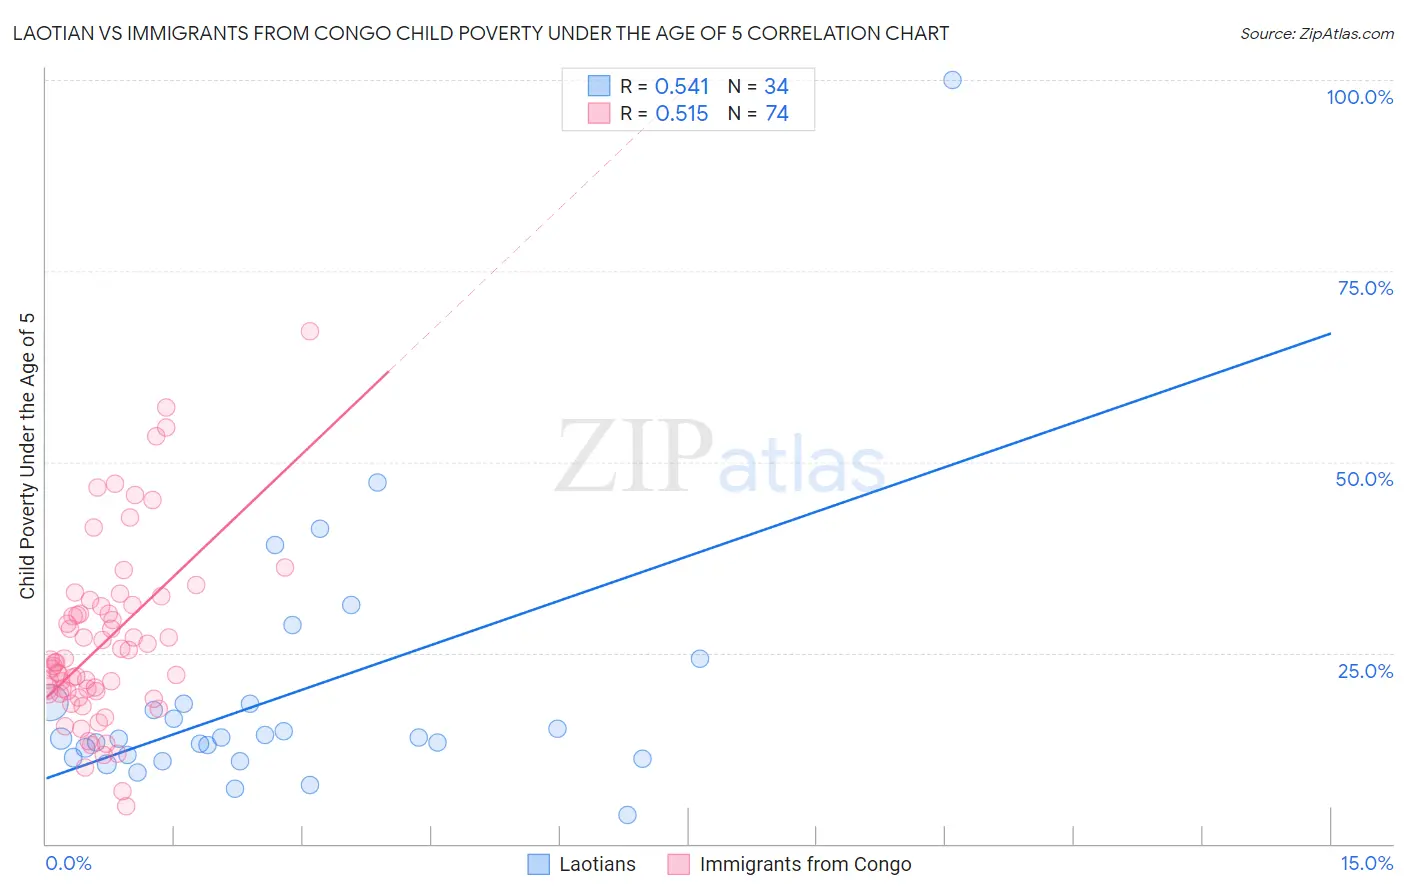 Laotian vs Immigrants from Congo Child Poverty Under the Age of 5